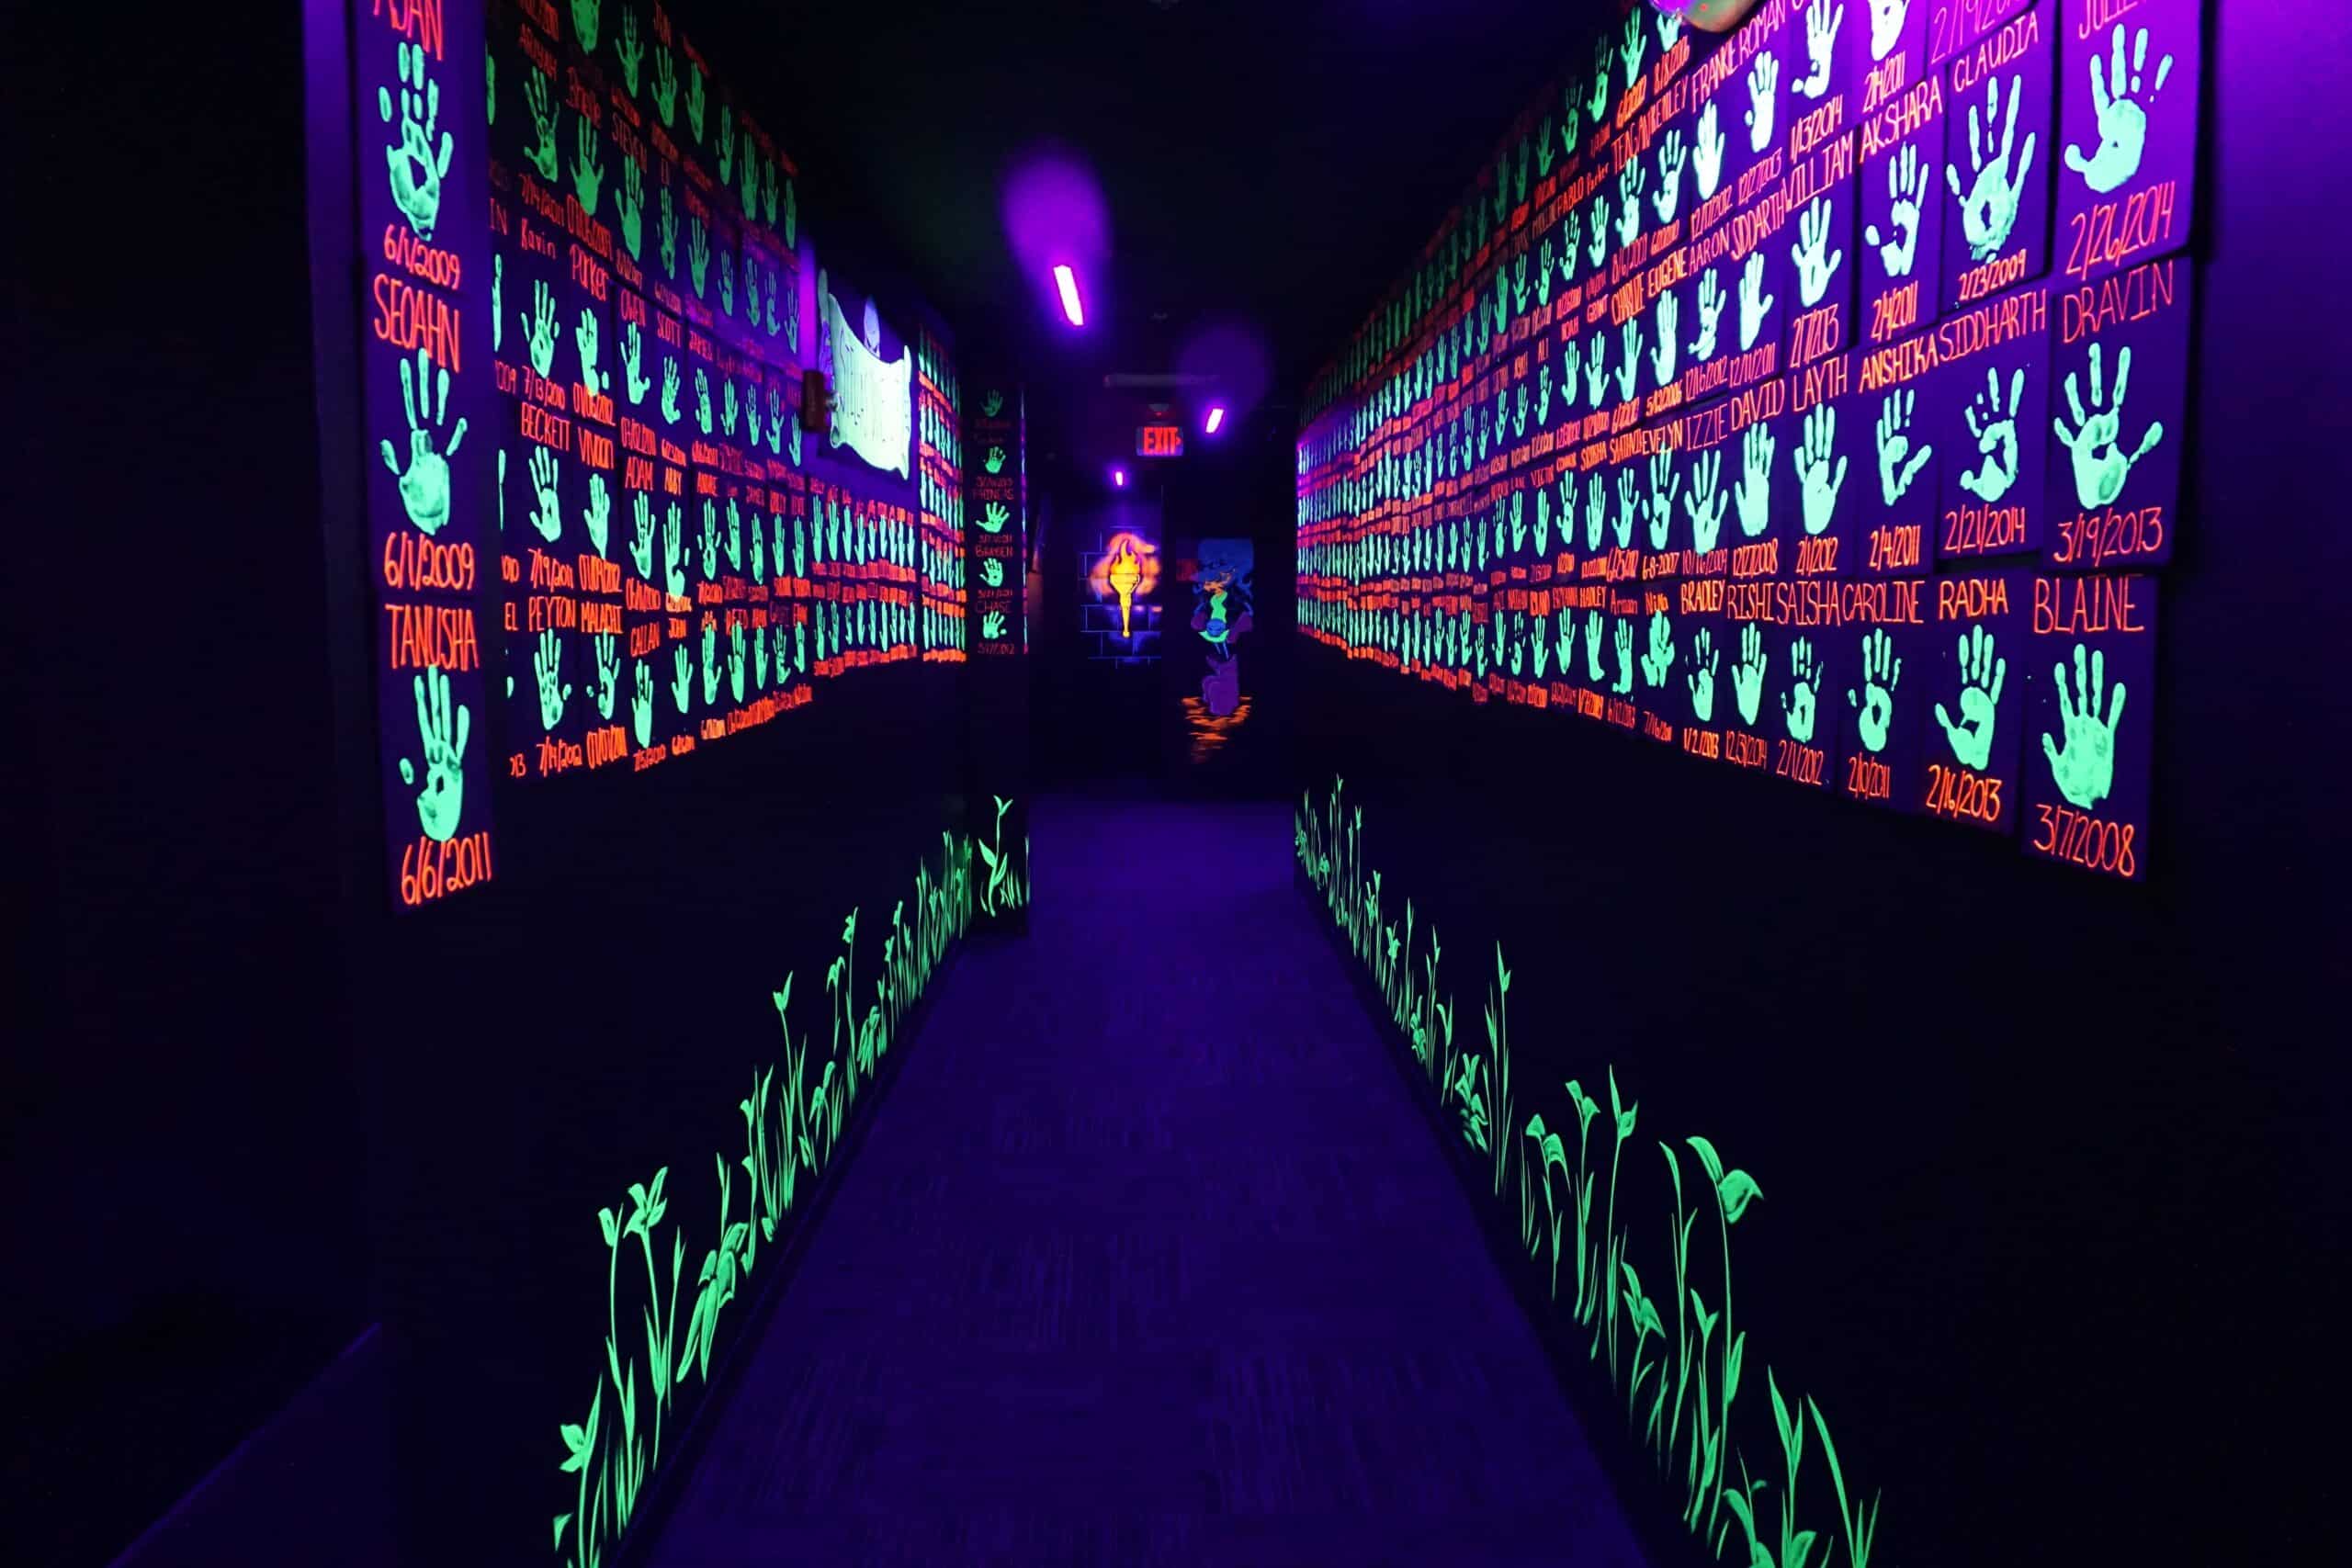 hallway with glow-in-the-dark hand prints